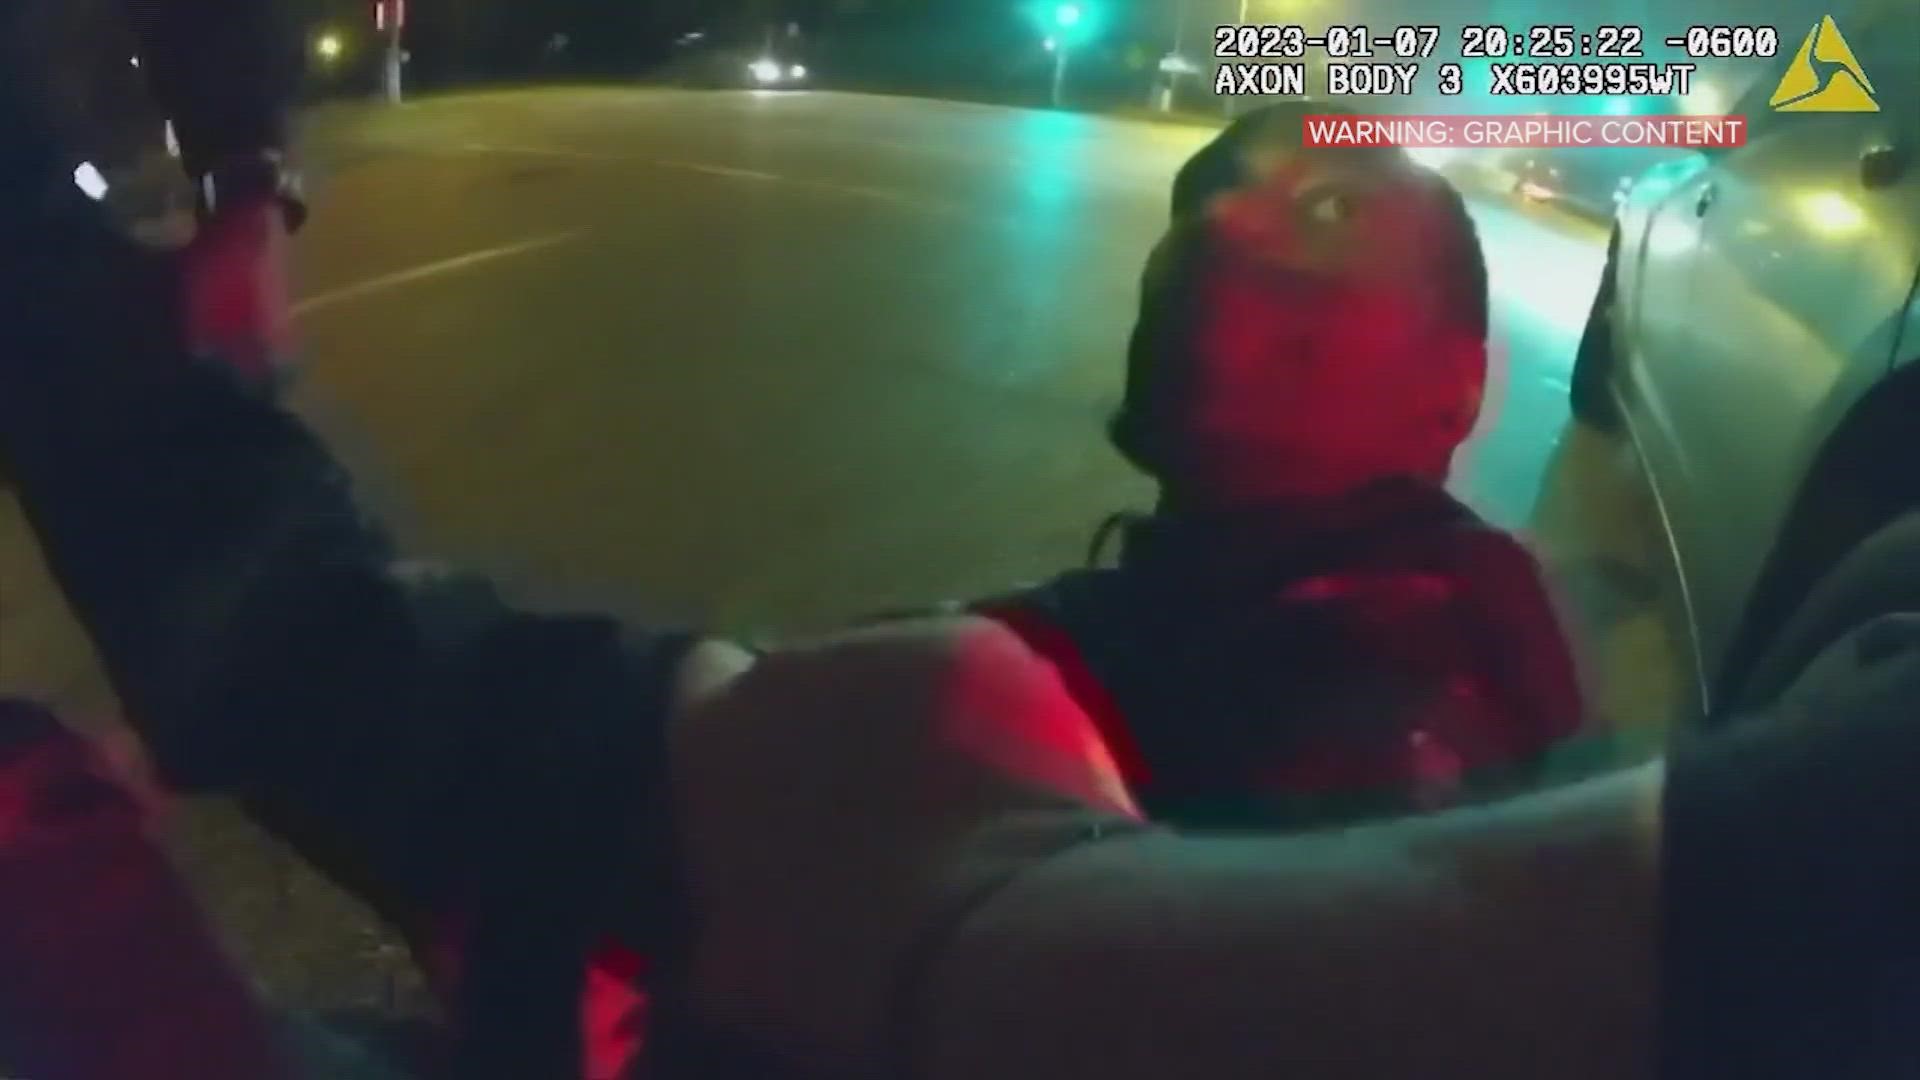 City of Memphis officials released the graphic footage at 6 p.m. Friday.